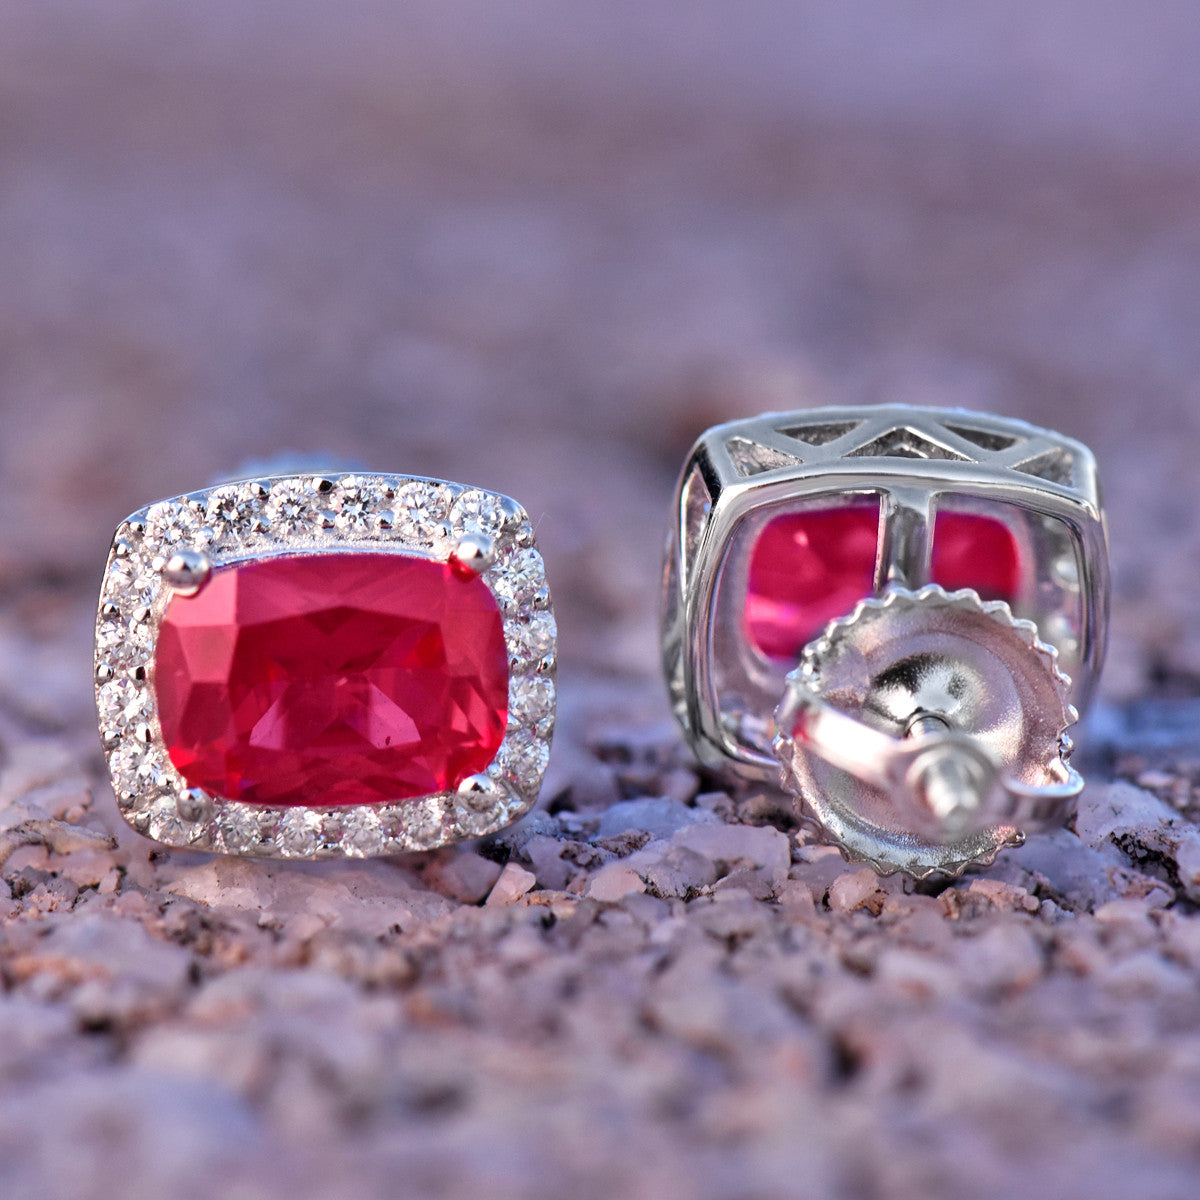 Unisex Red Ruby Stone Square Earrings